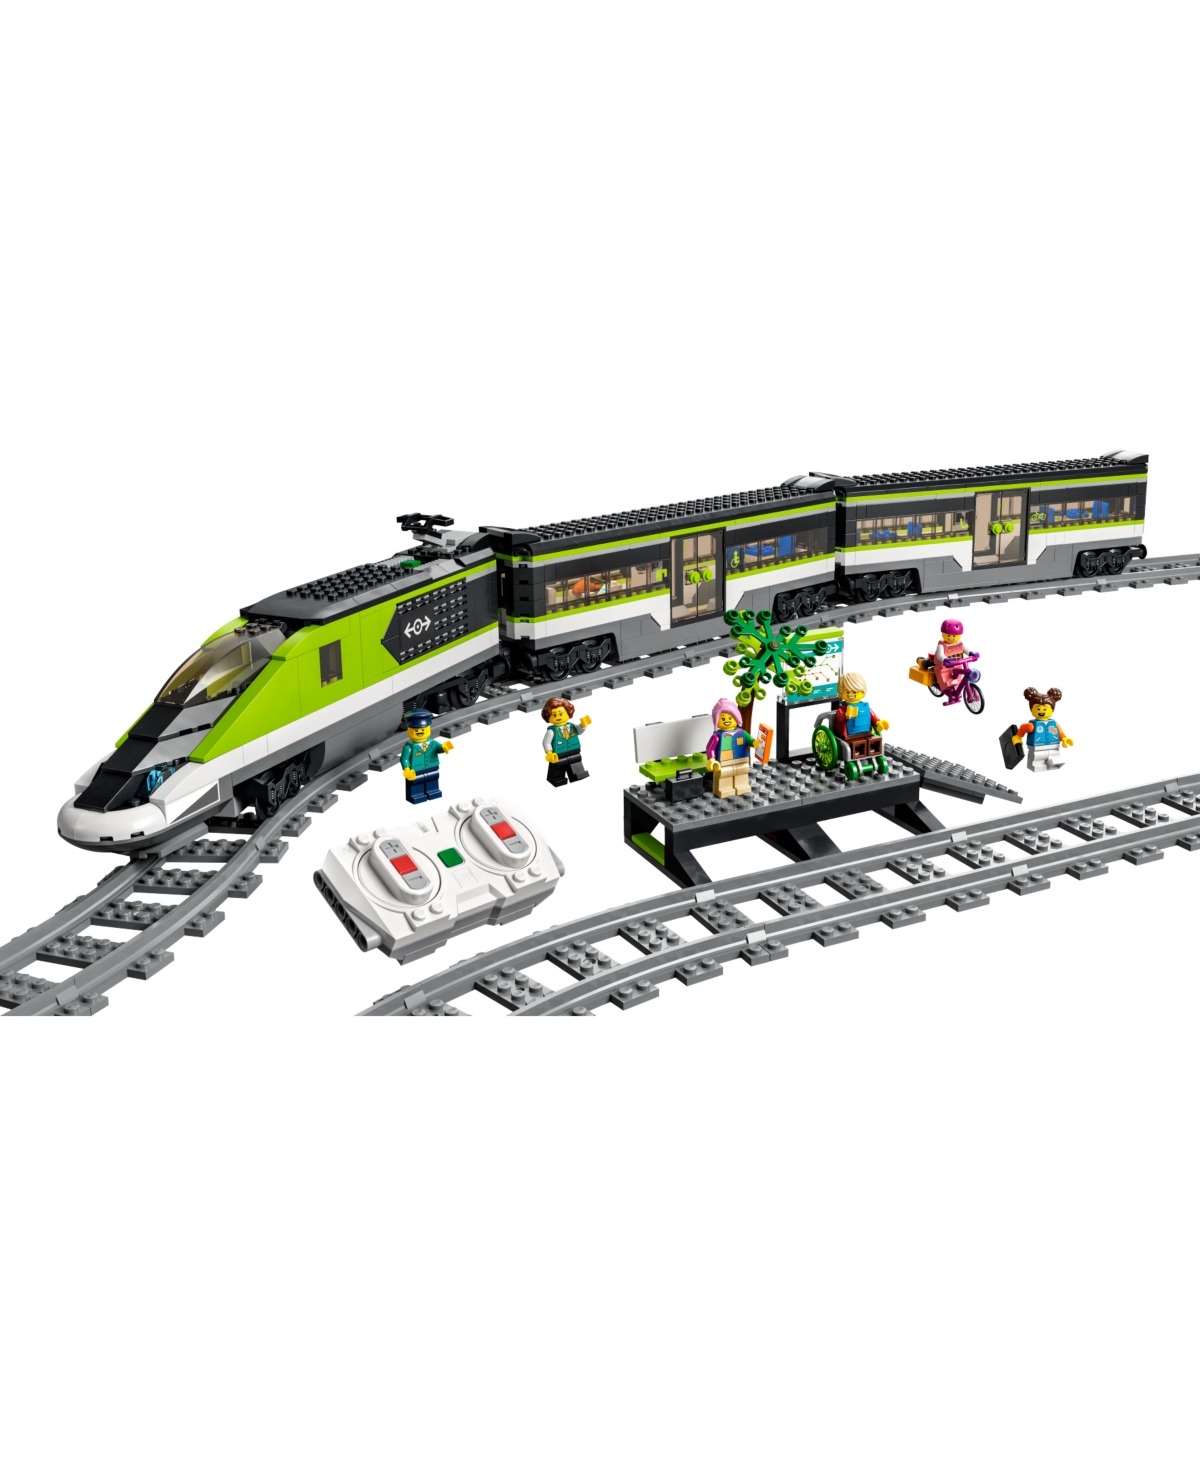 Shop Lego City Express Passenger Train 60337 Toy Building Set With 6 Minifigures In No Color